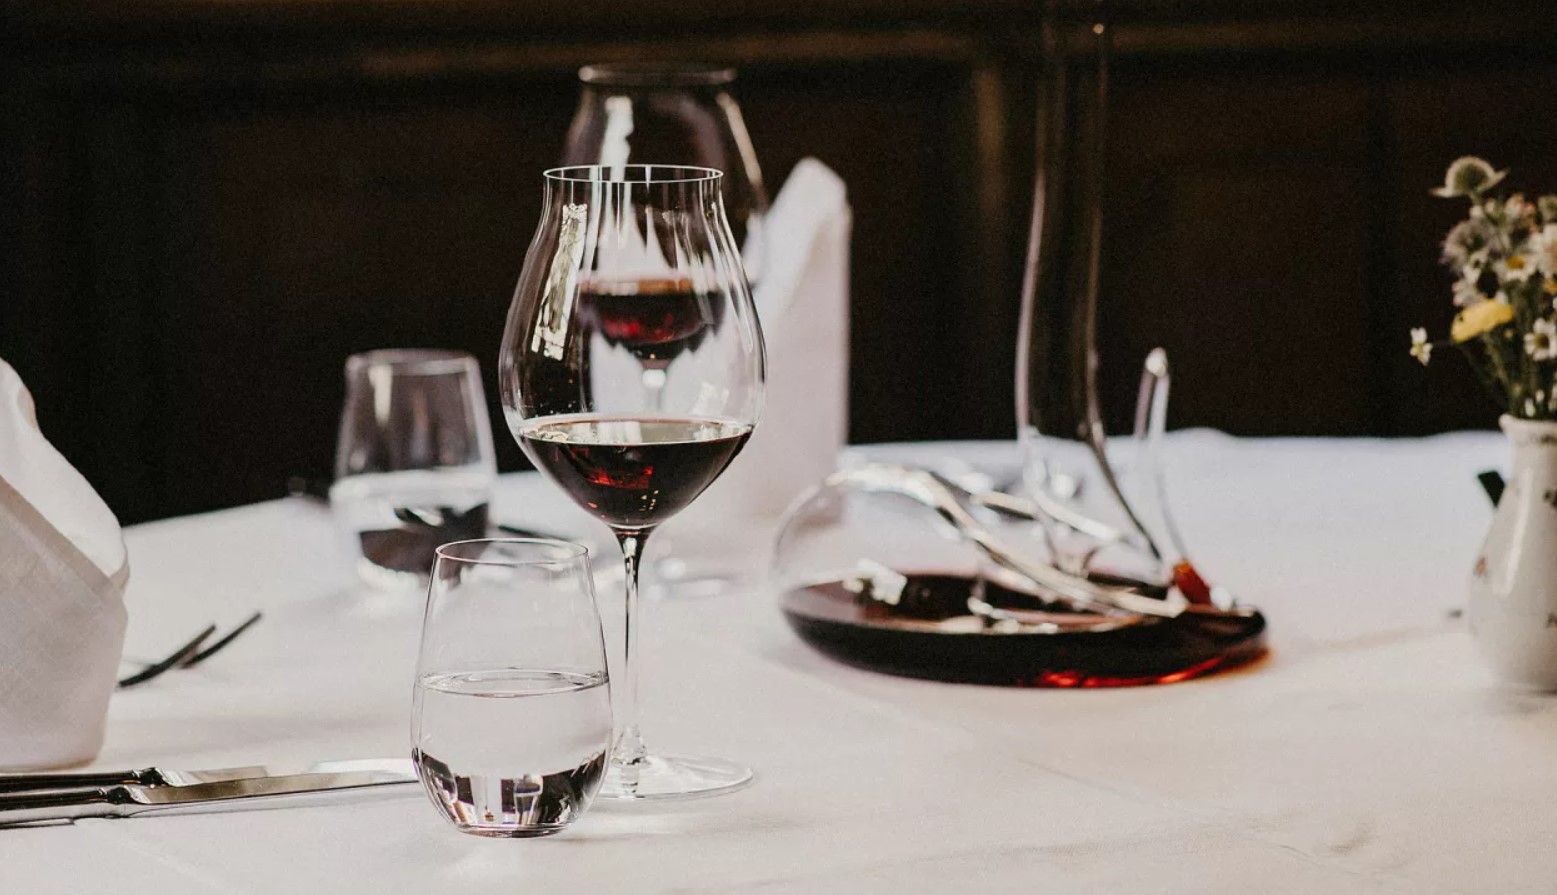 Image of Riedel performance glass on a restaurant table